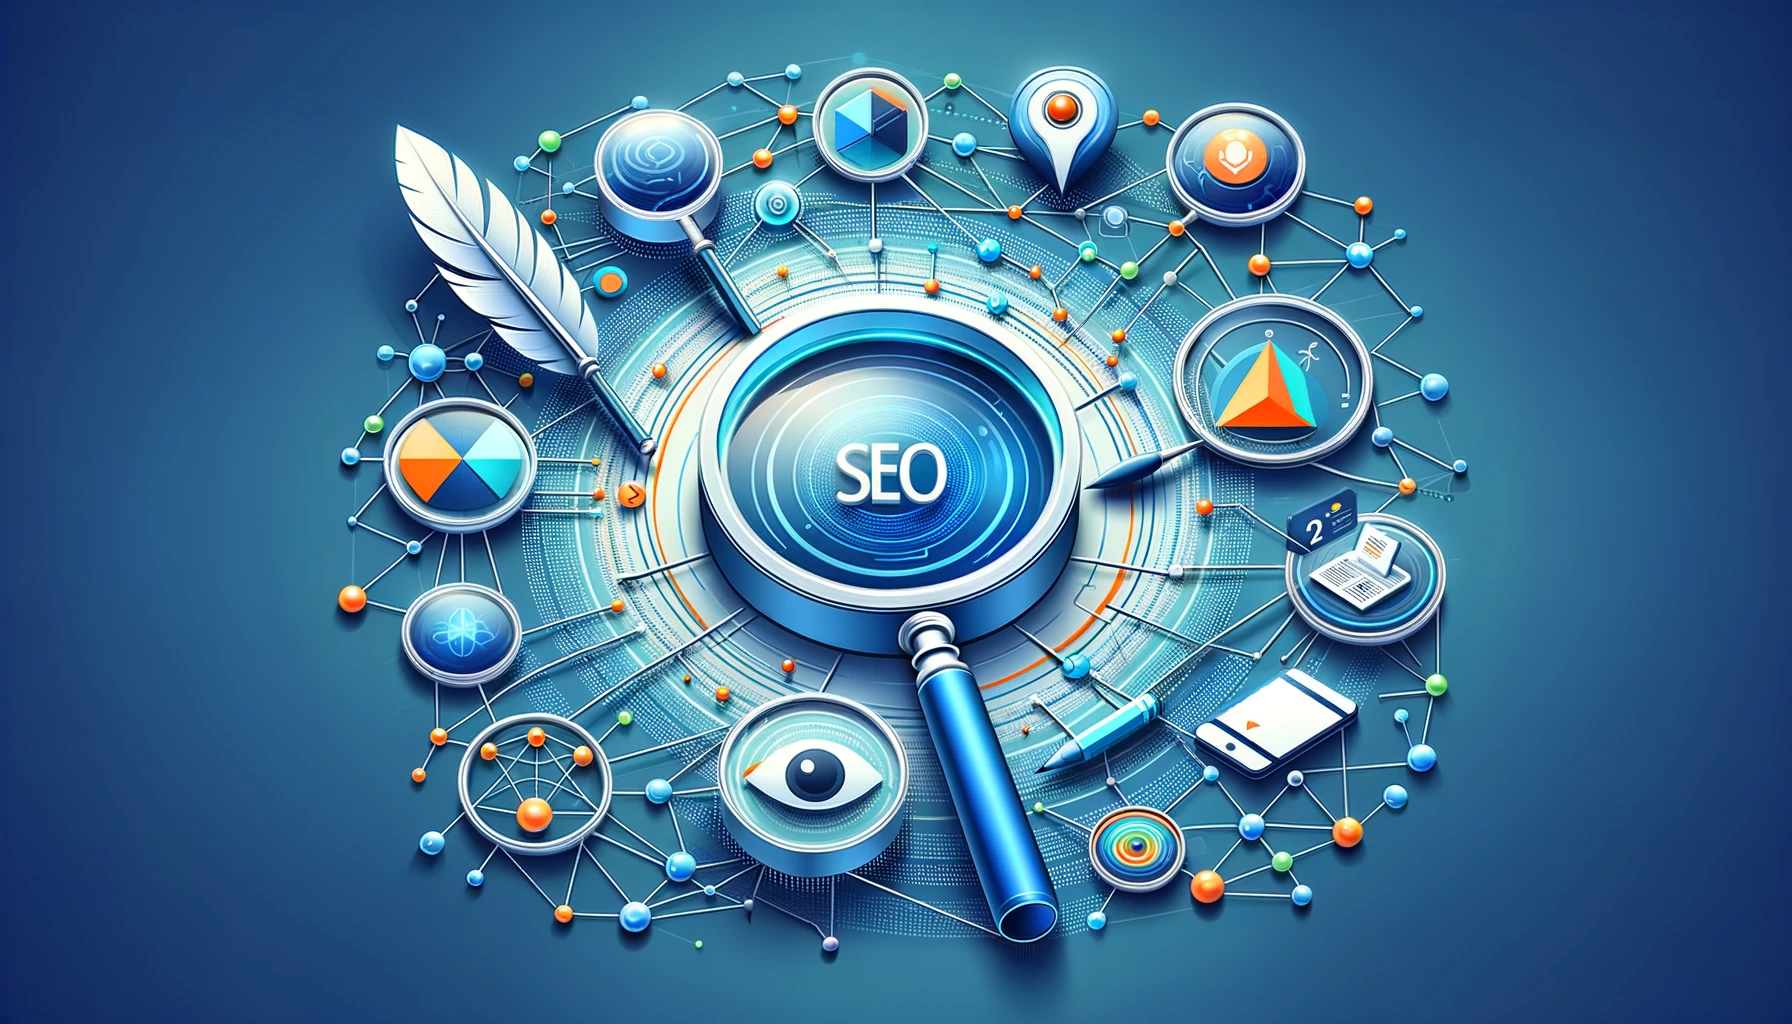 Visual representation of Landing Page SEO showcasing integration of SEO elements like targeted keywords, quality content, user-friendly design, and backlink strategy.